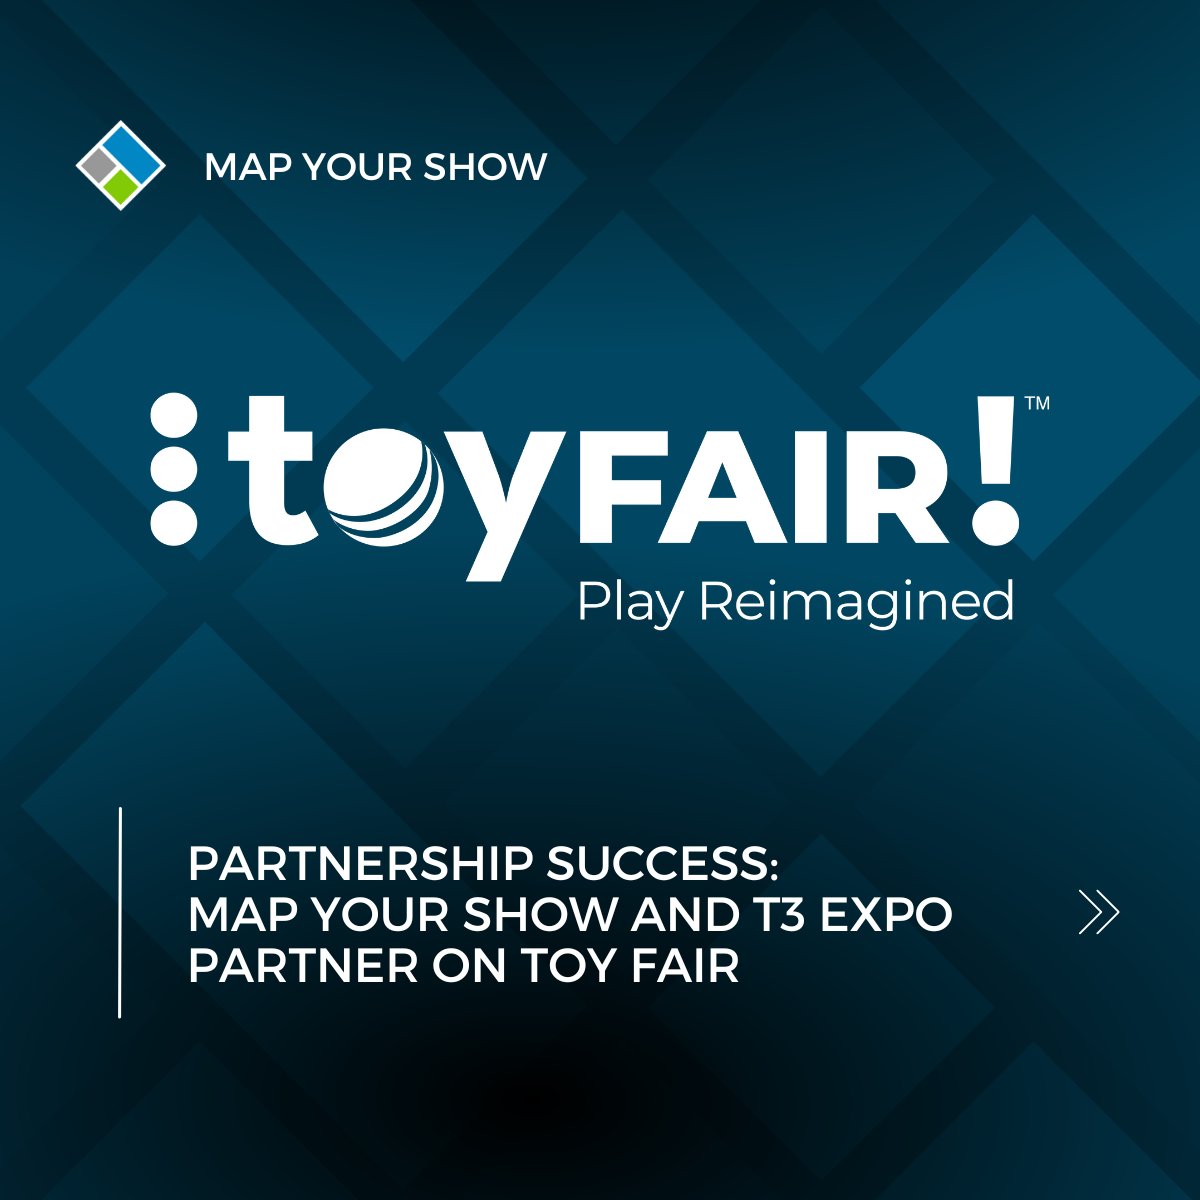 ✨ Event News ✨ @T3Expo revolutionizes its event management system with a cutting-edge floor plan solution at the renowned Toy Fair. Learn more about the game-changing partnership of Map Your Show and T3 Expo! 🚀🎉 🔗 bit.ly/3VDIRzx

#EventPartner #EventProf